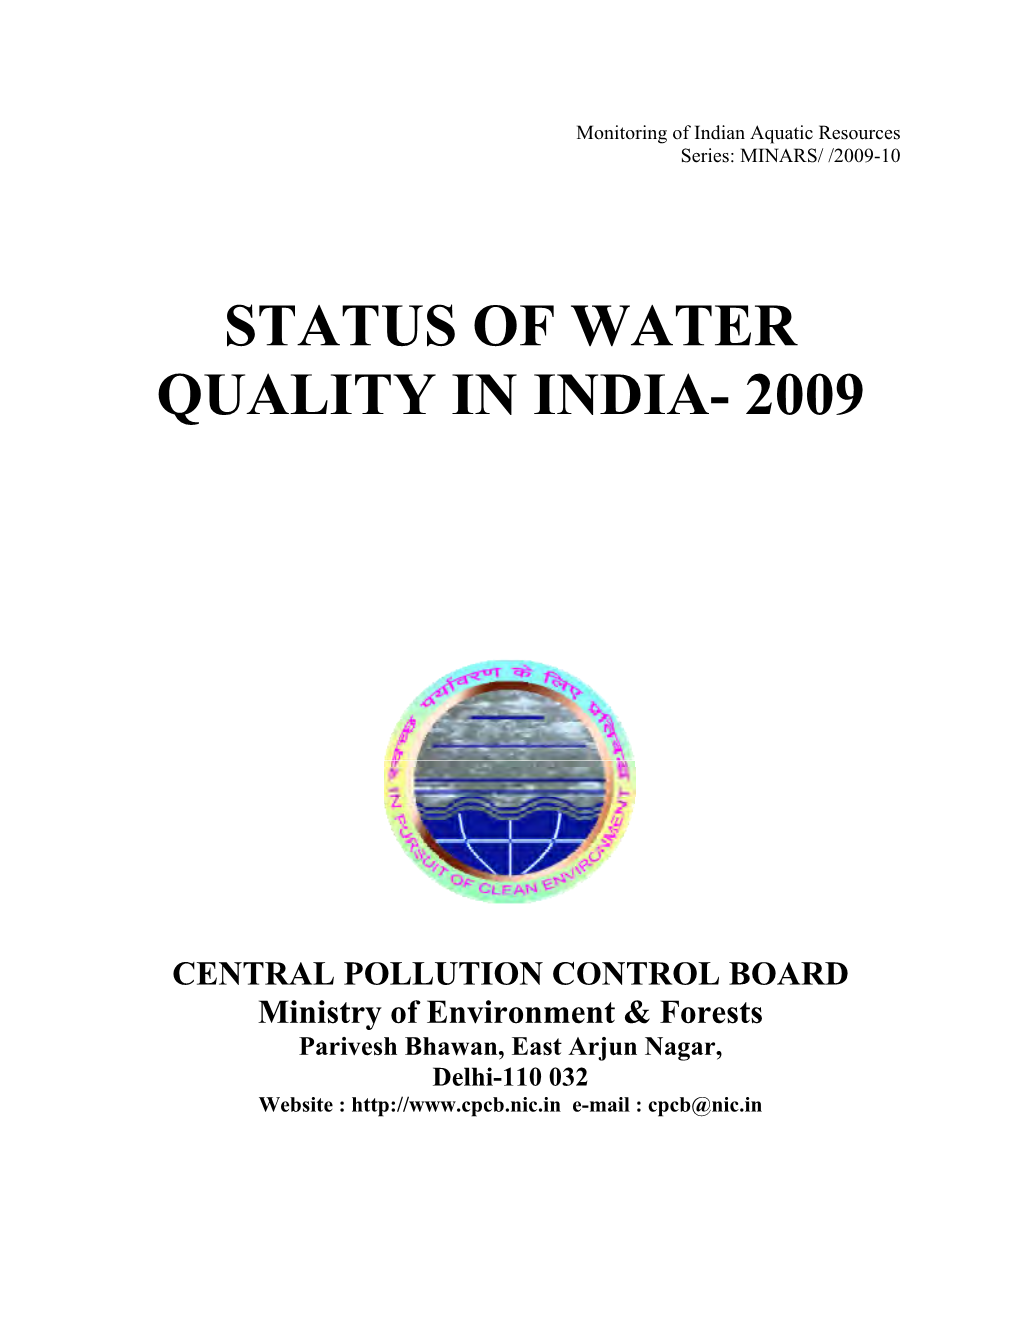 Status of Water Quality in India 2009, Central Pollution Control Board